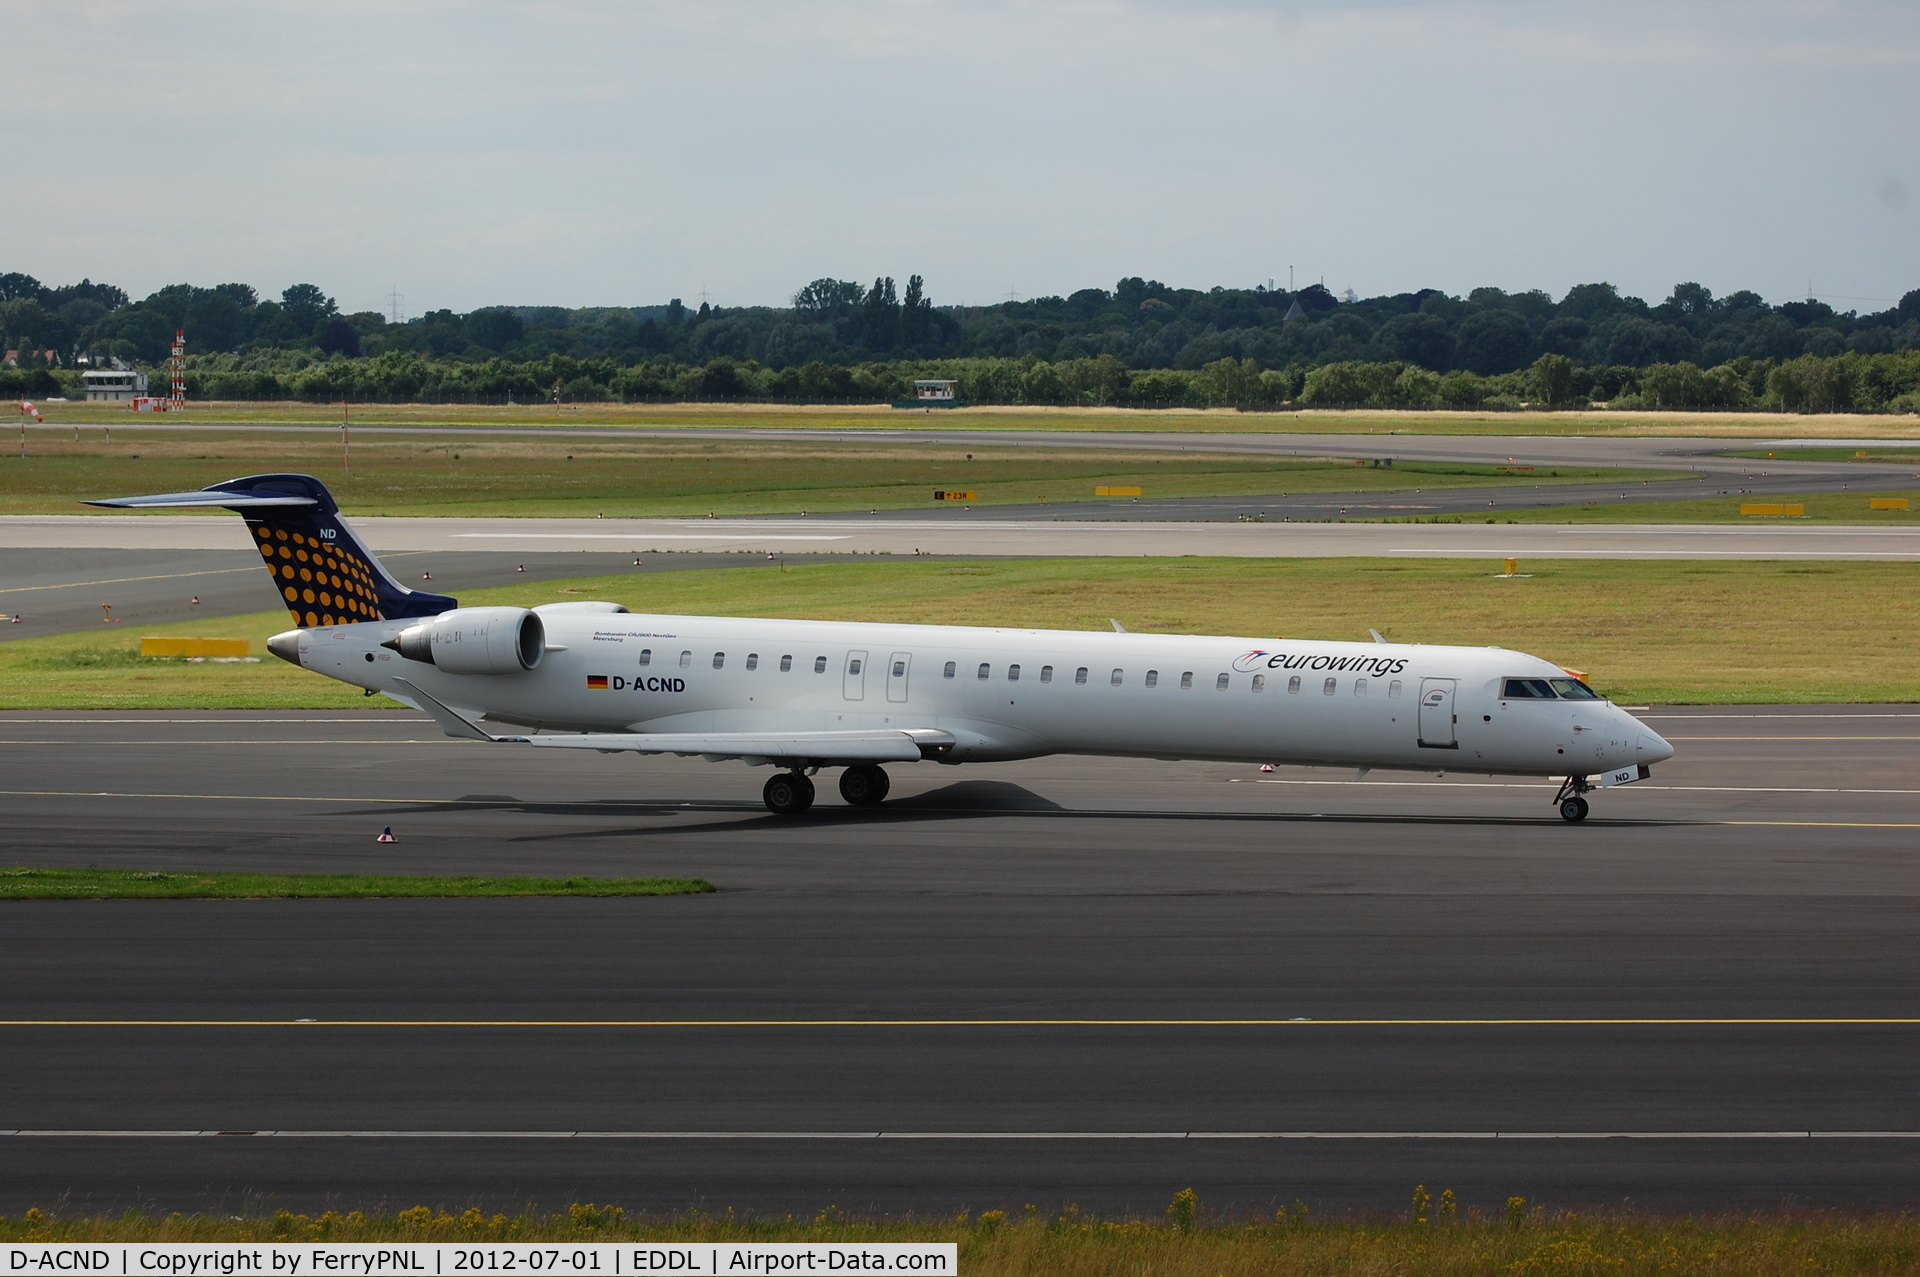 D-ACND, 2009 Bombardier CRJ-701 (CL-600-2C10) Regional Jet C/N 15238, Eurowings operating out of DUS, its base.